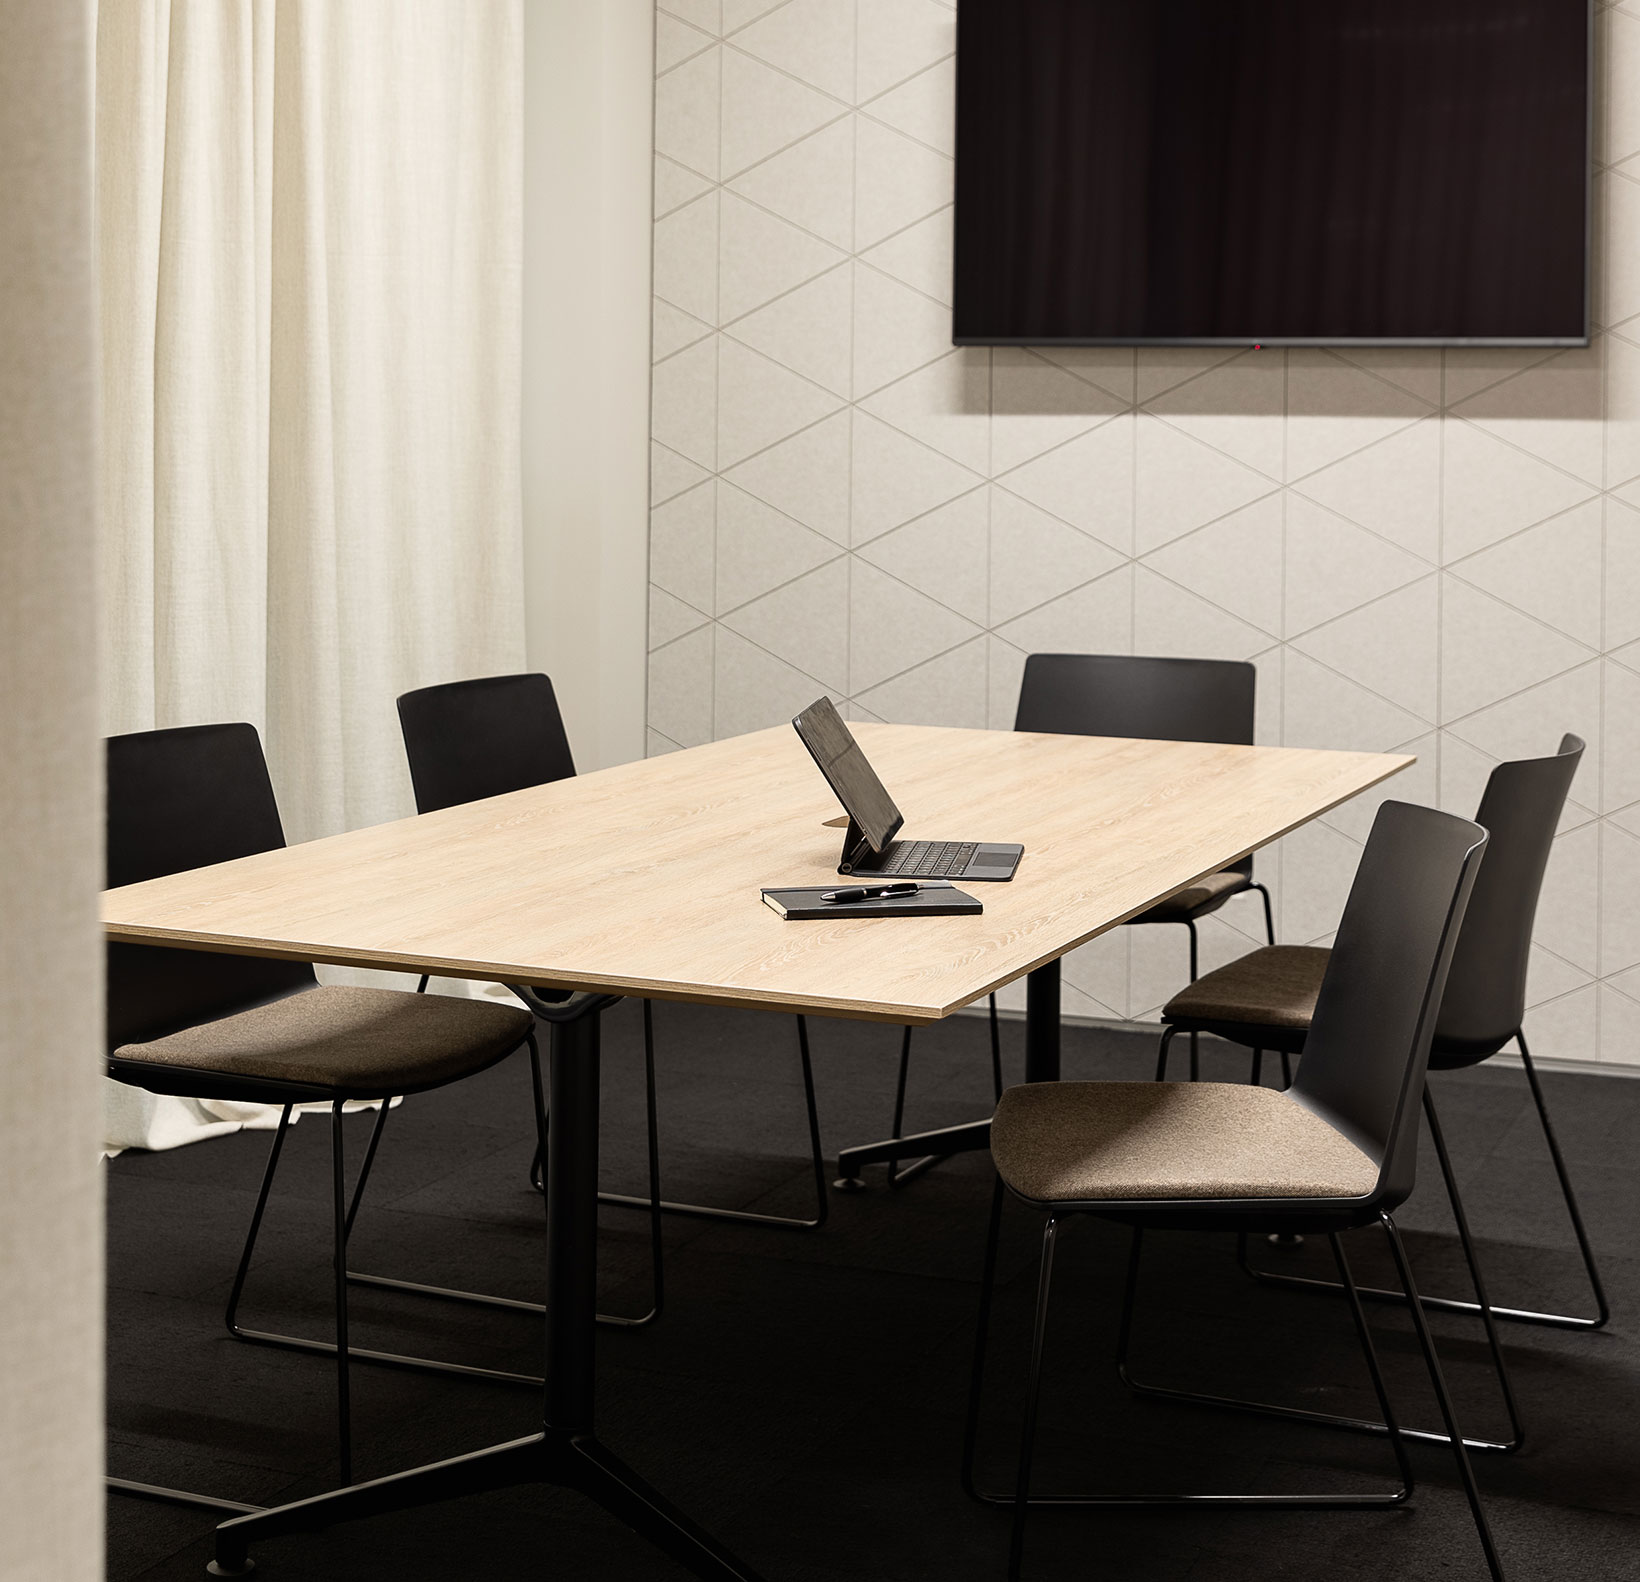 sinclair-house-shared-space-meeting-room-2